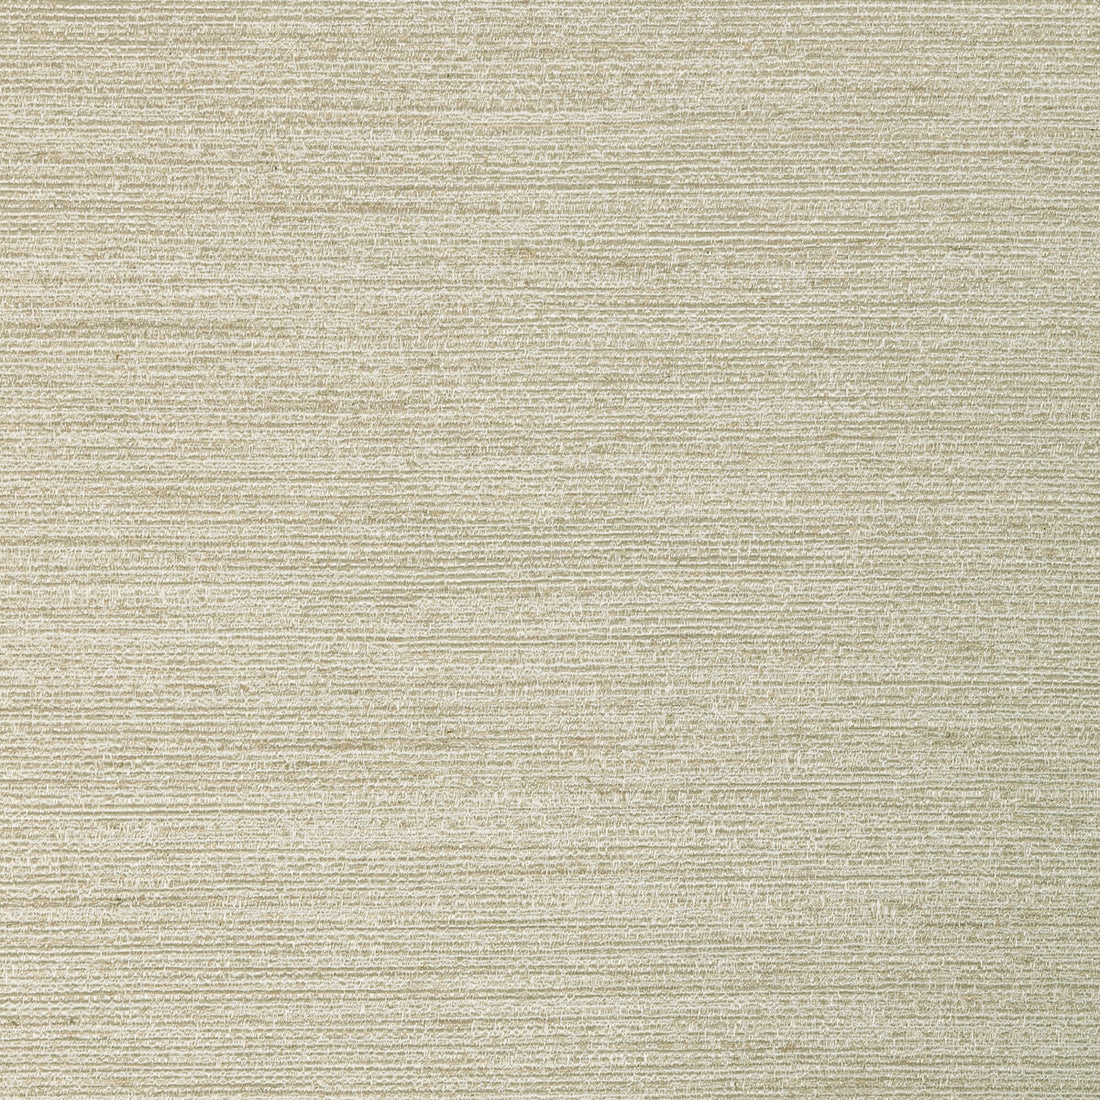 Cultivate fabric in wheat color - pattern 4957.416.0 - by Kravet Couture in the Modern Luxe Silk Luster collection